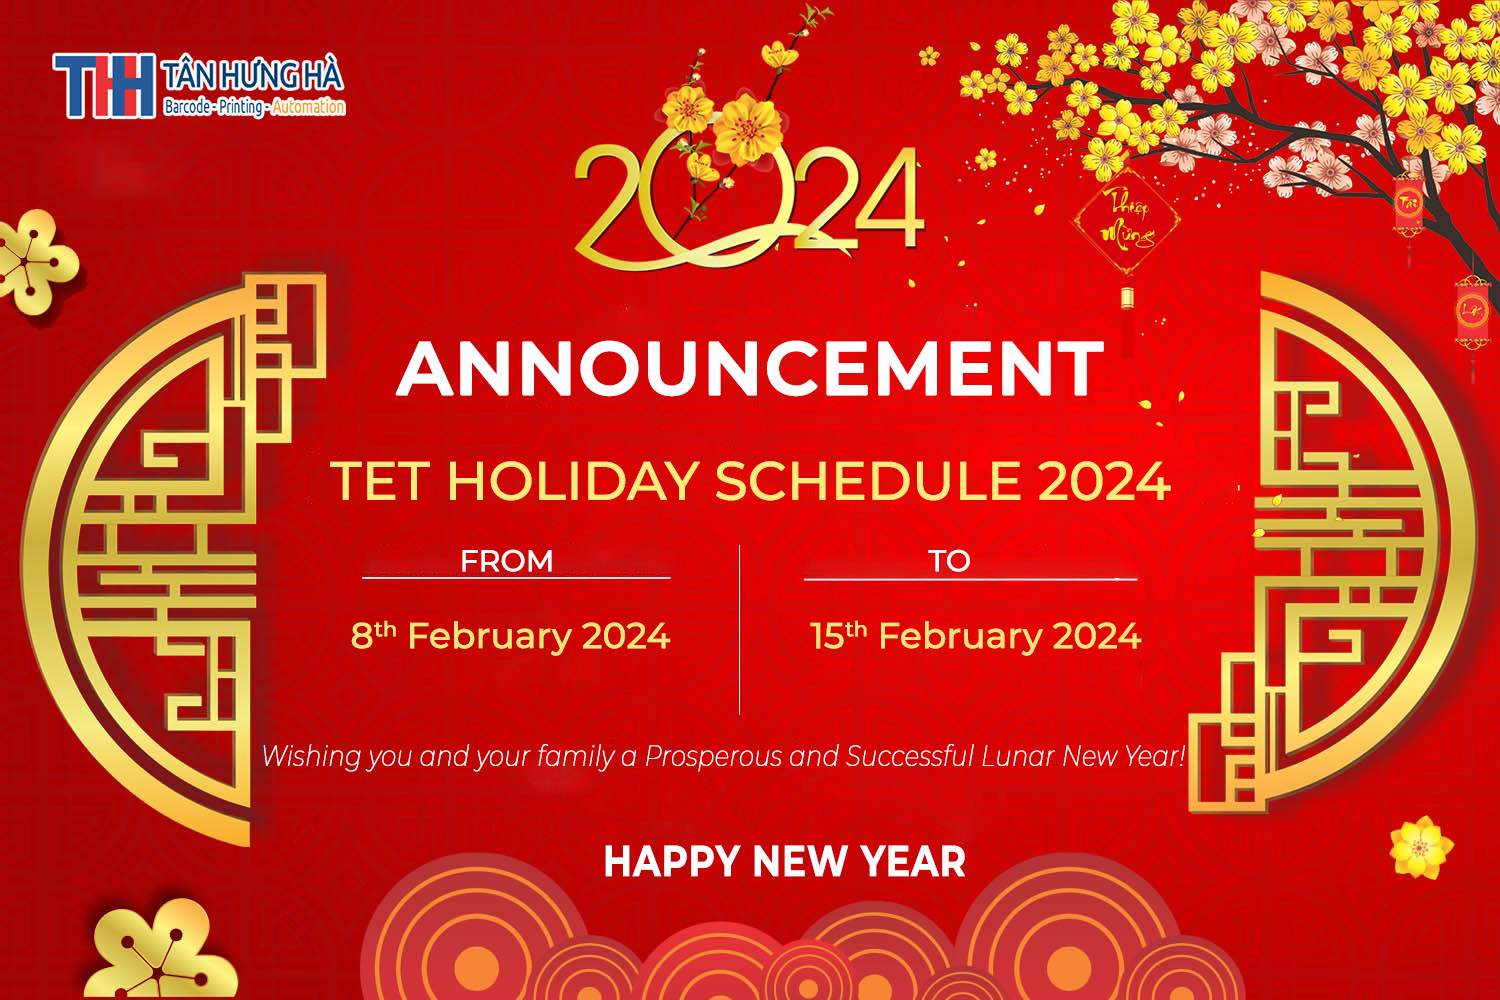 TAN HUNG HA ANNOUNCES THE LUNAR NEW YEAR HOLIDAY SCHEDULE 2024